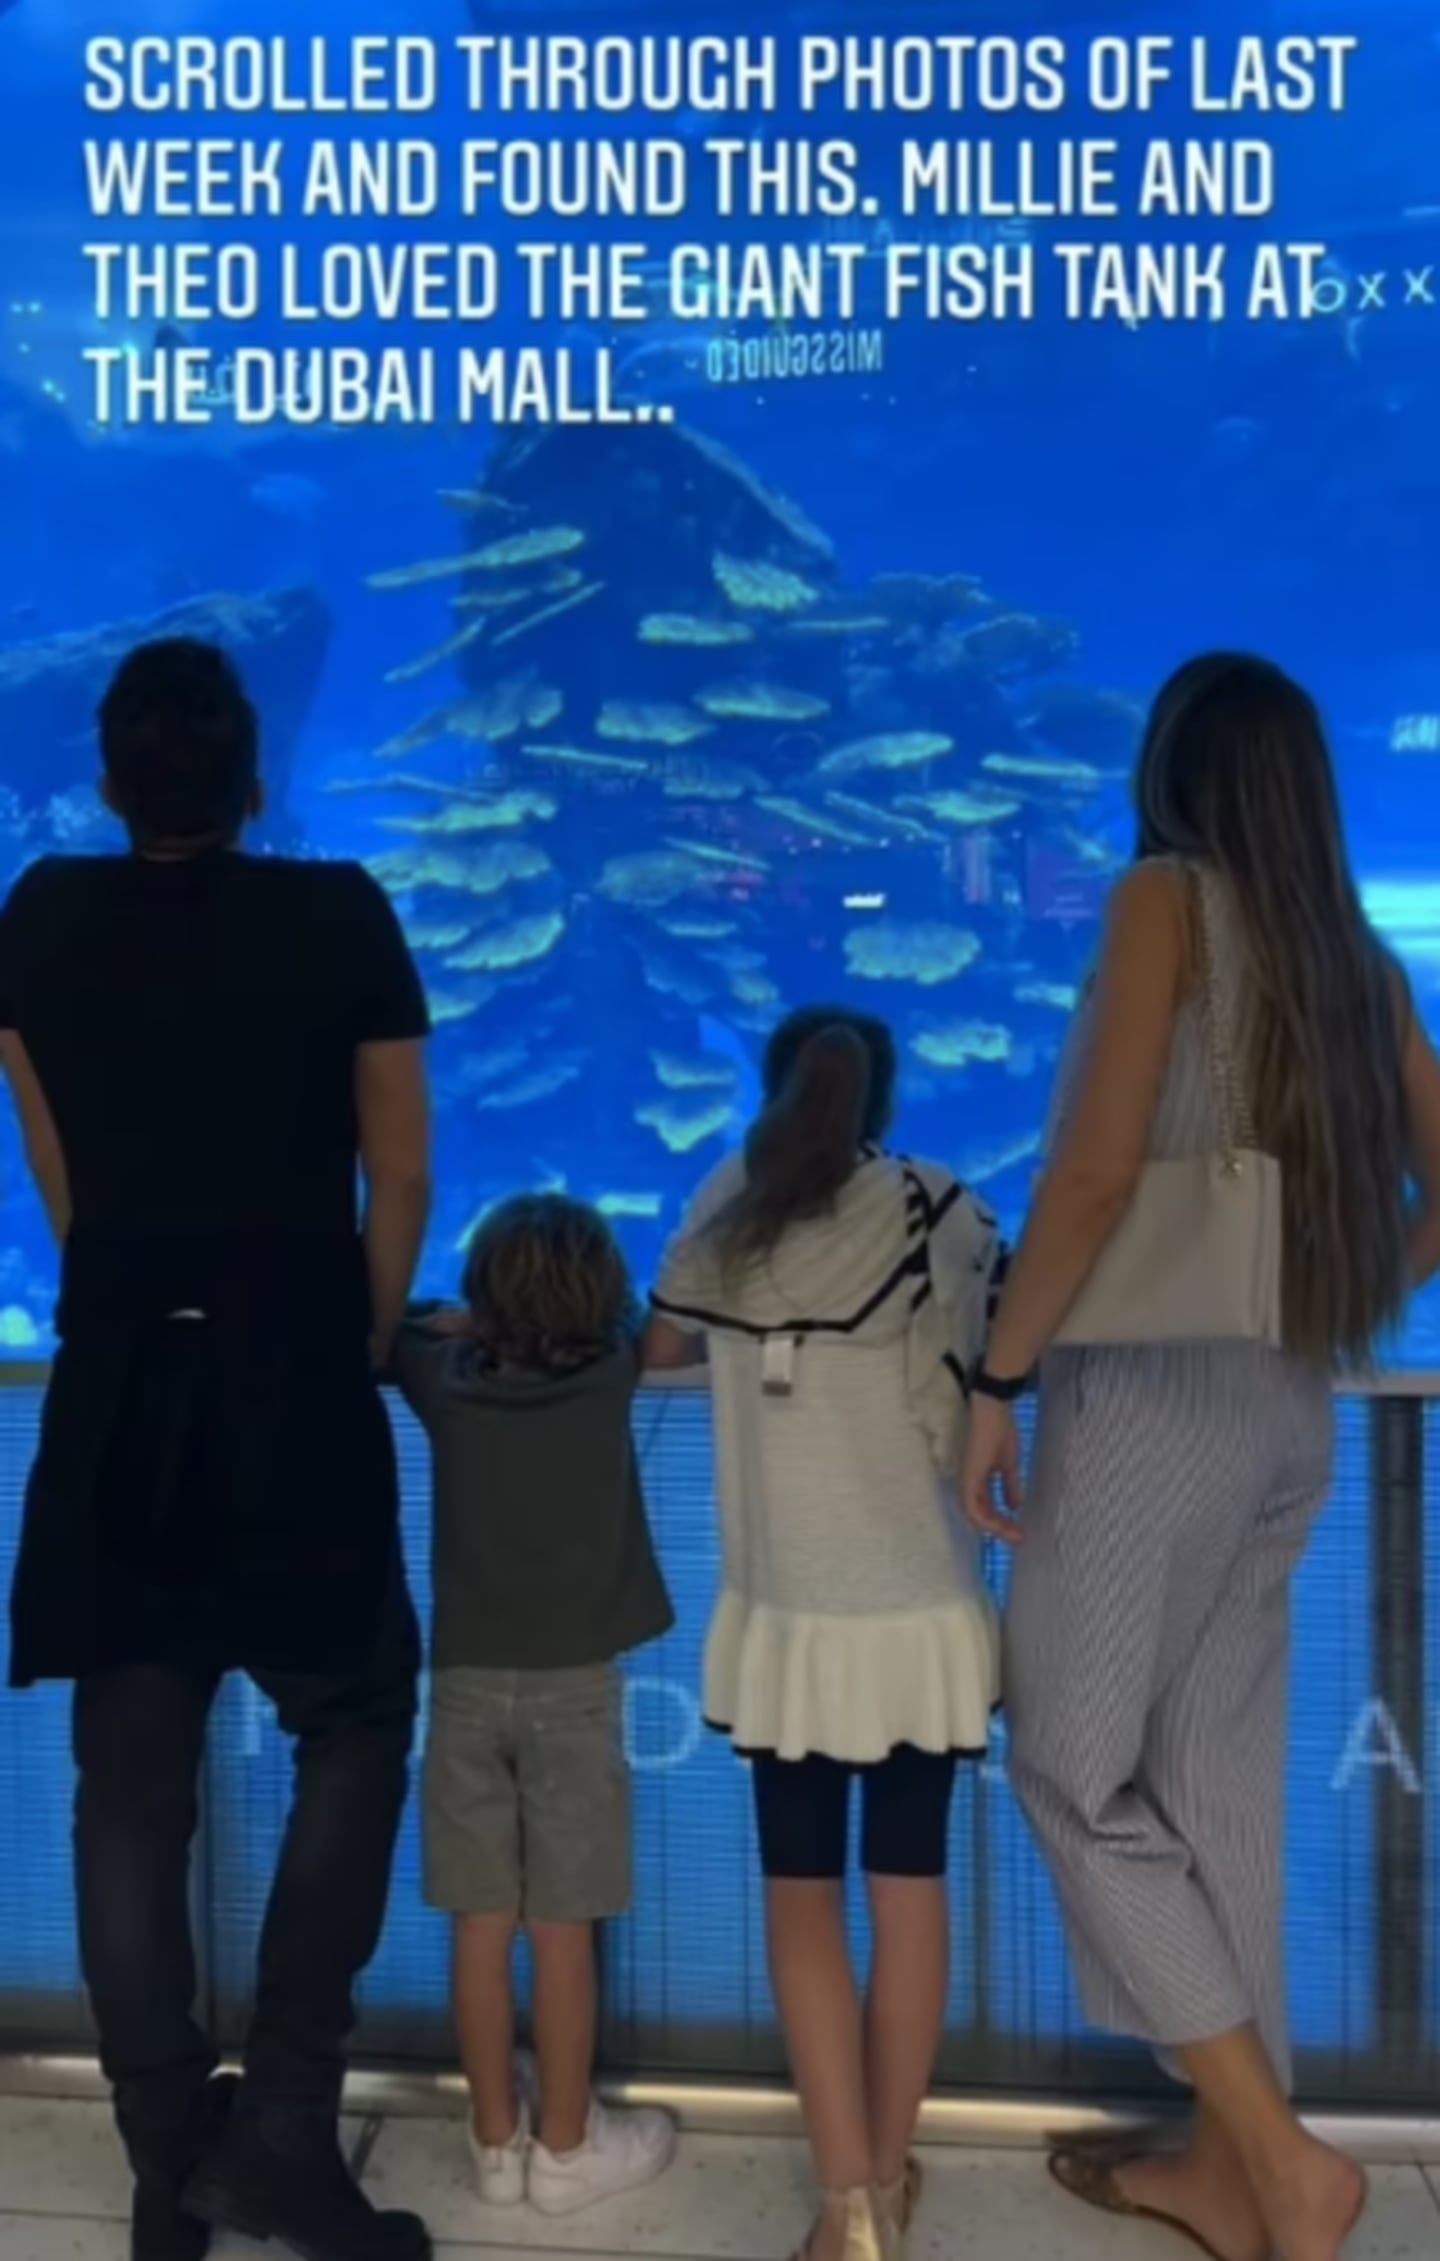 Peter Andre and his family at the Dubai Aquarium at The Dubai Mall. Photo: Instagram / The Dubai Mall